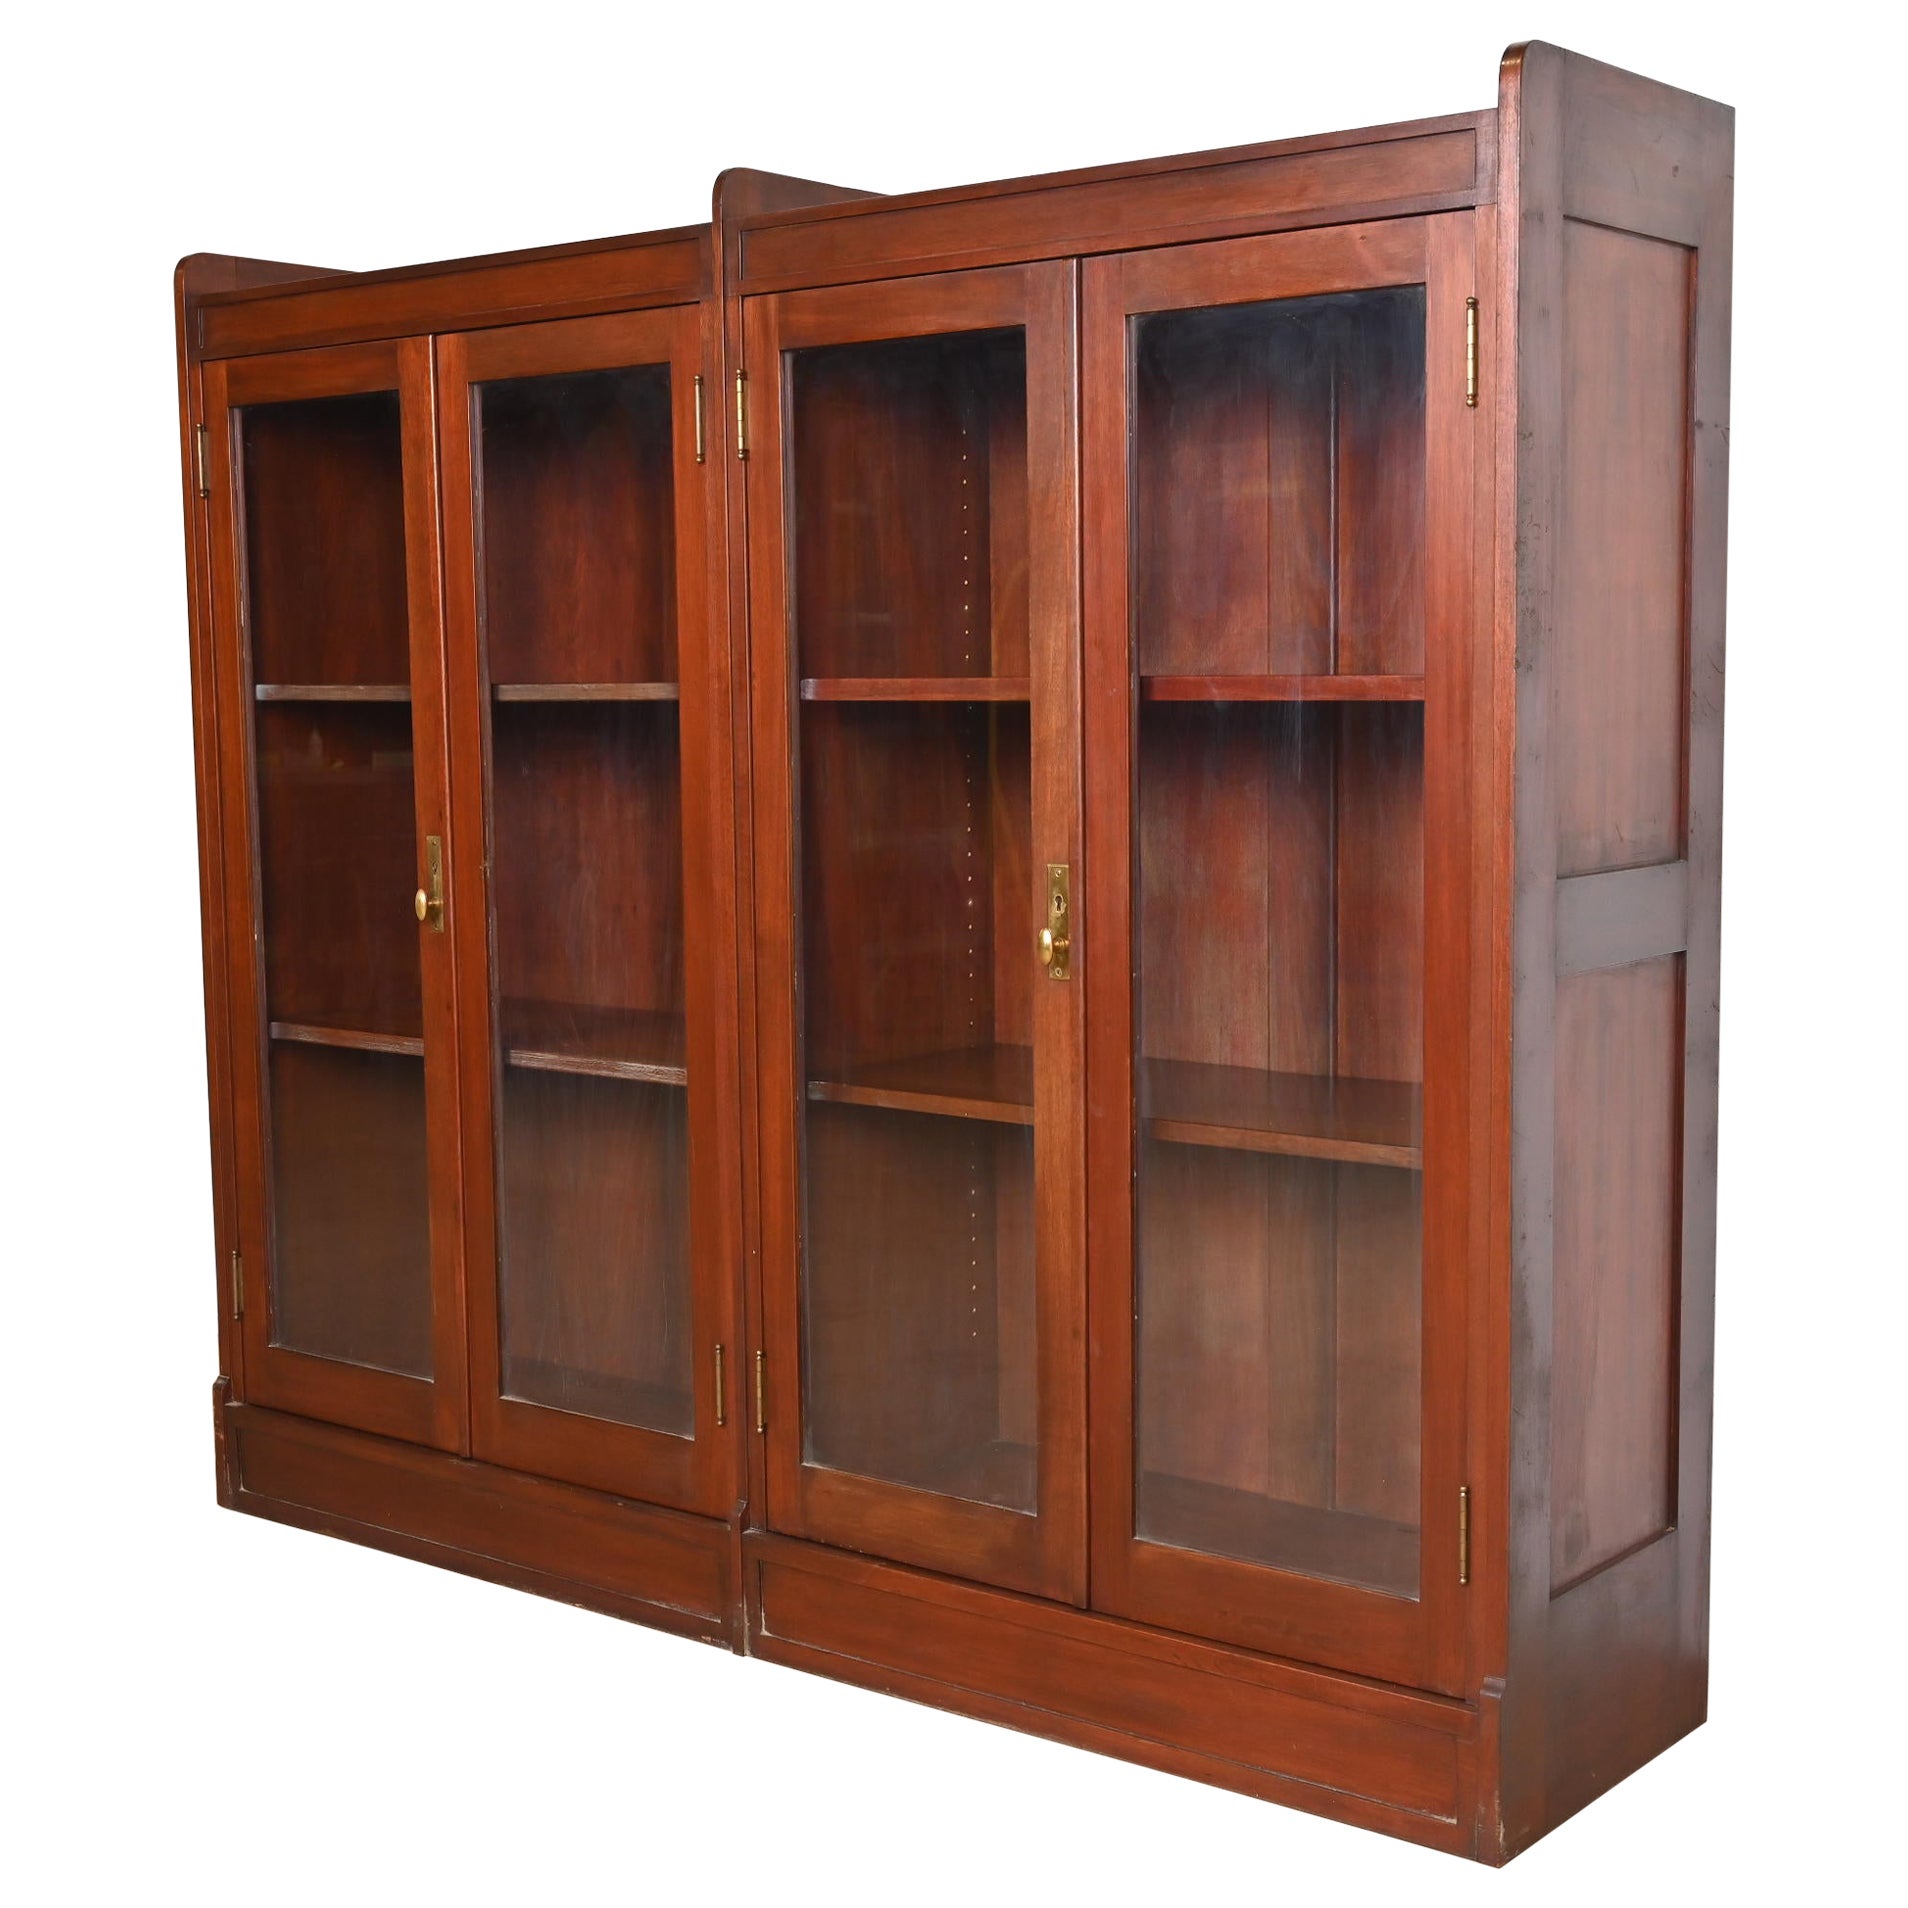 Antique Stickley Style Arts and Crafts Solid Mahogany Double Bookcase, 1920s